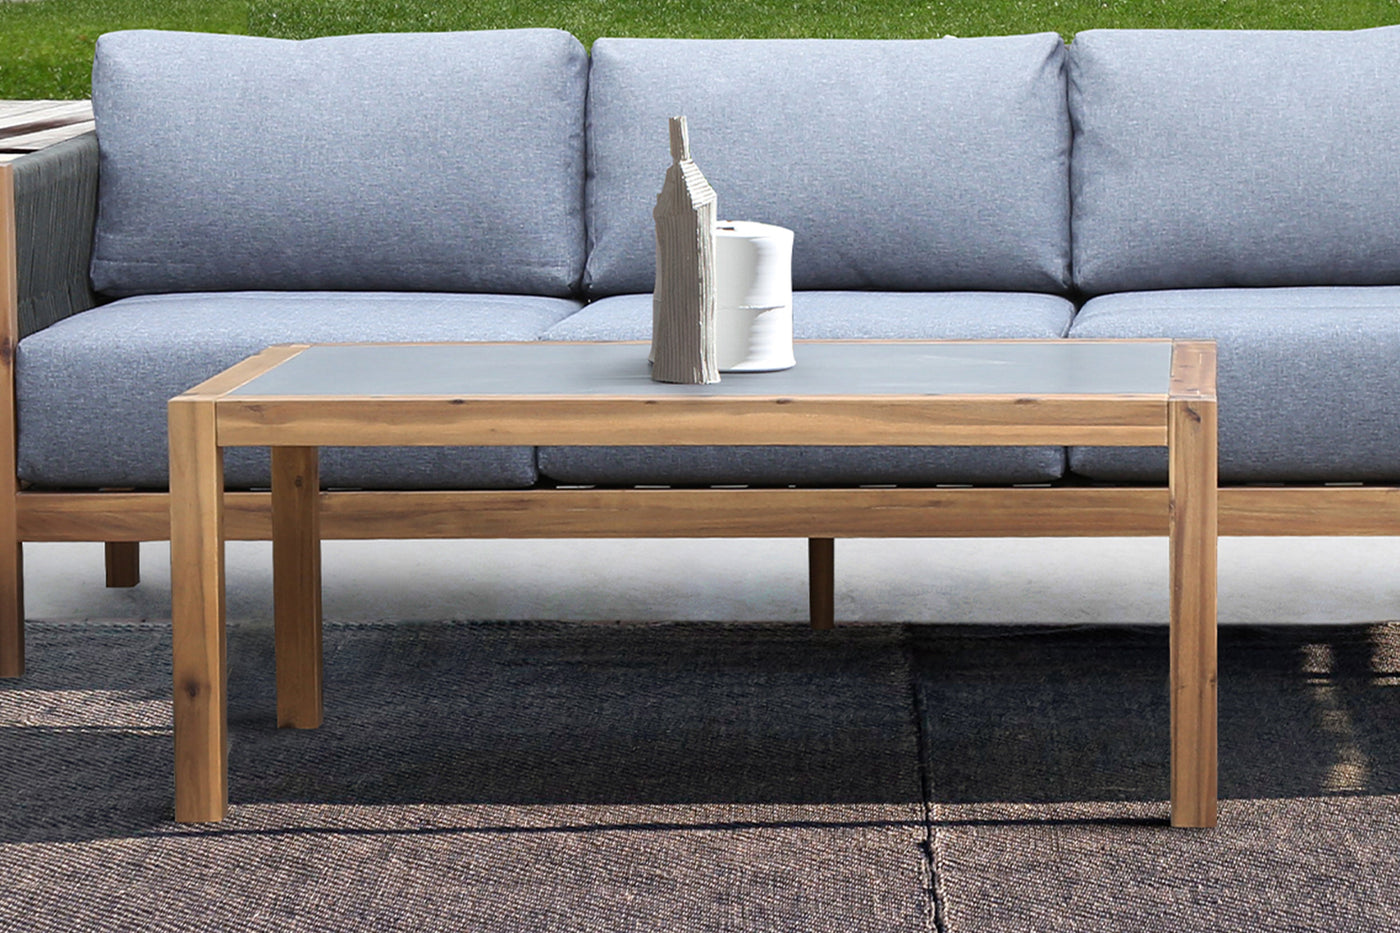 Sienna Outdoor Coffee Table